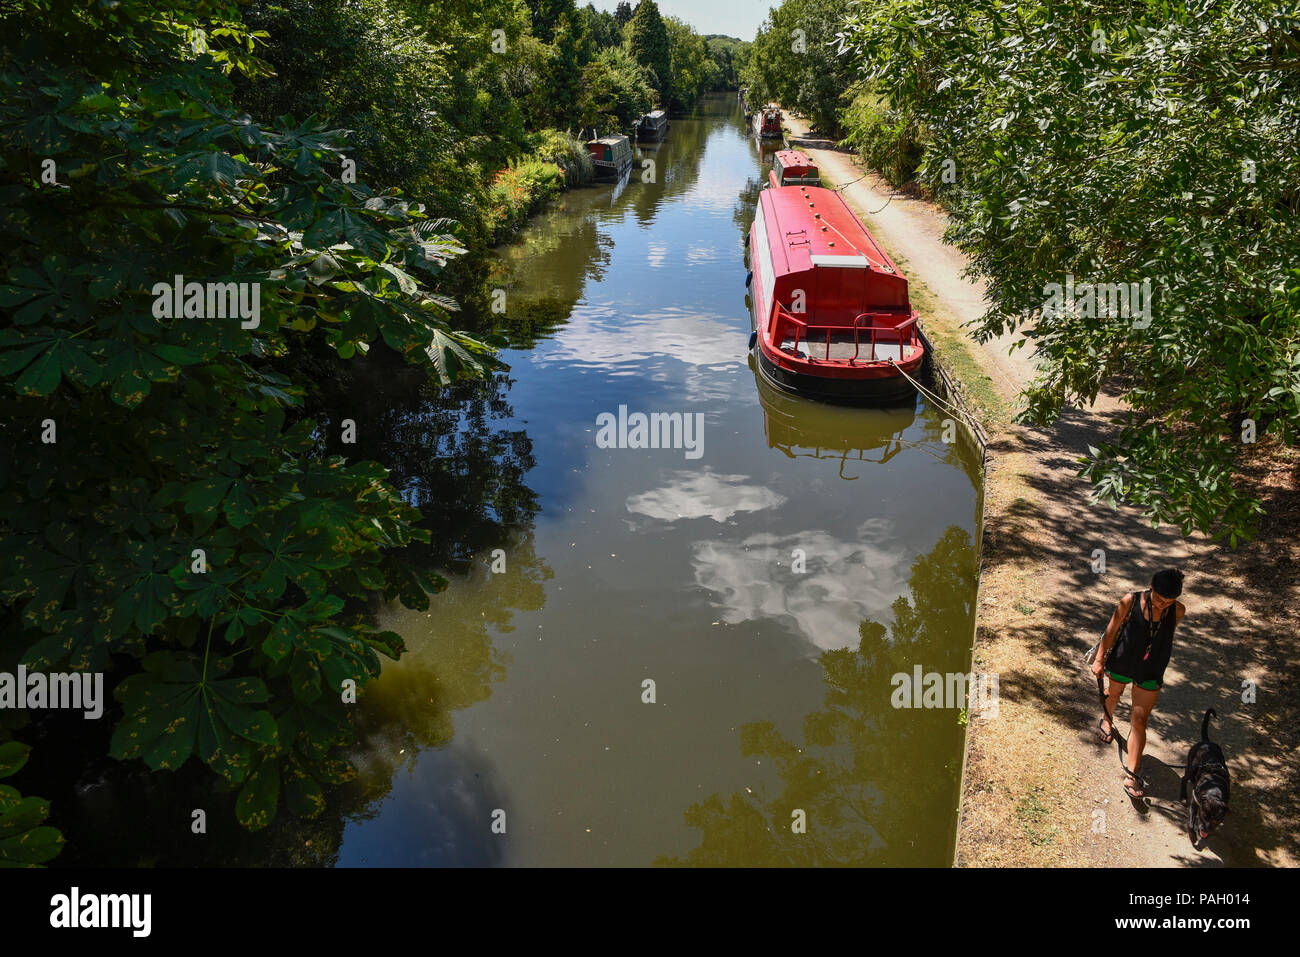 London, UK.  23 June 2018. A woman walks her dog by the canal near Rickmansworth Aquadrome in north west London, on a day when temperatures reached 30C.  Temperatures up to 35C are forecast for the rest of the week during the current heatwave. Credit: Stephen Chung / Alamy Live News Stock Photo